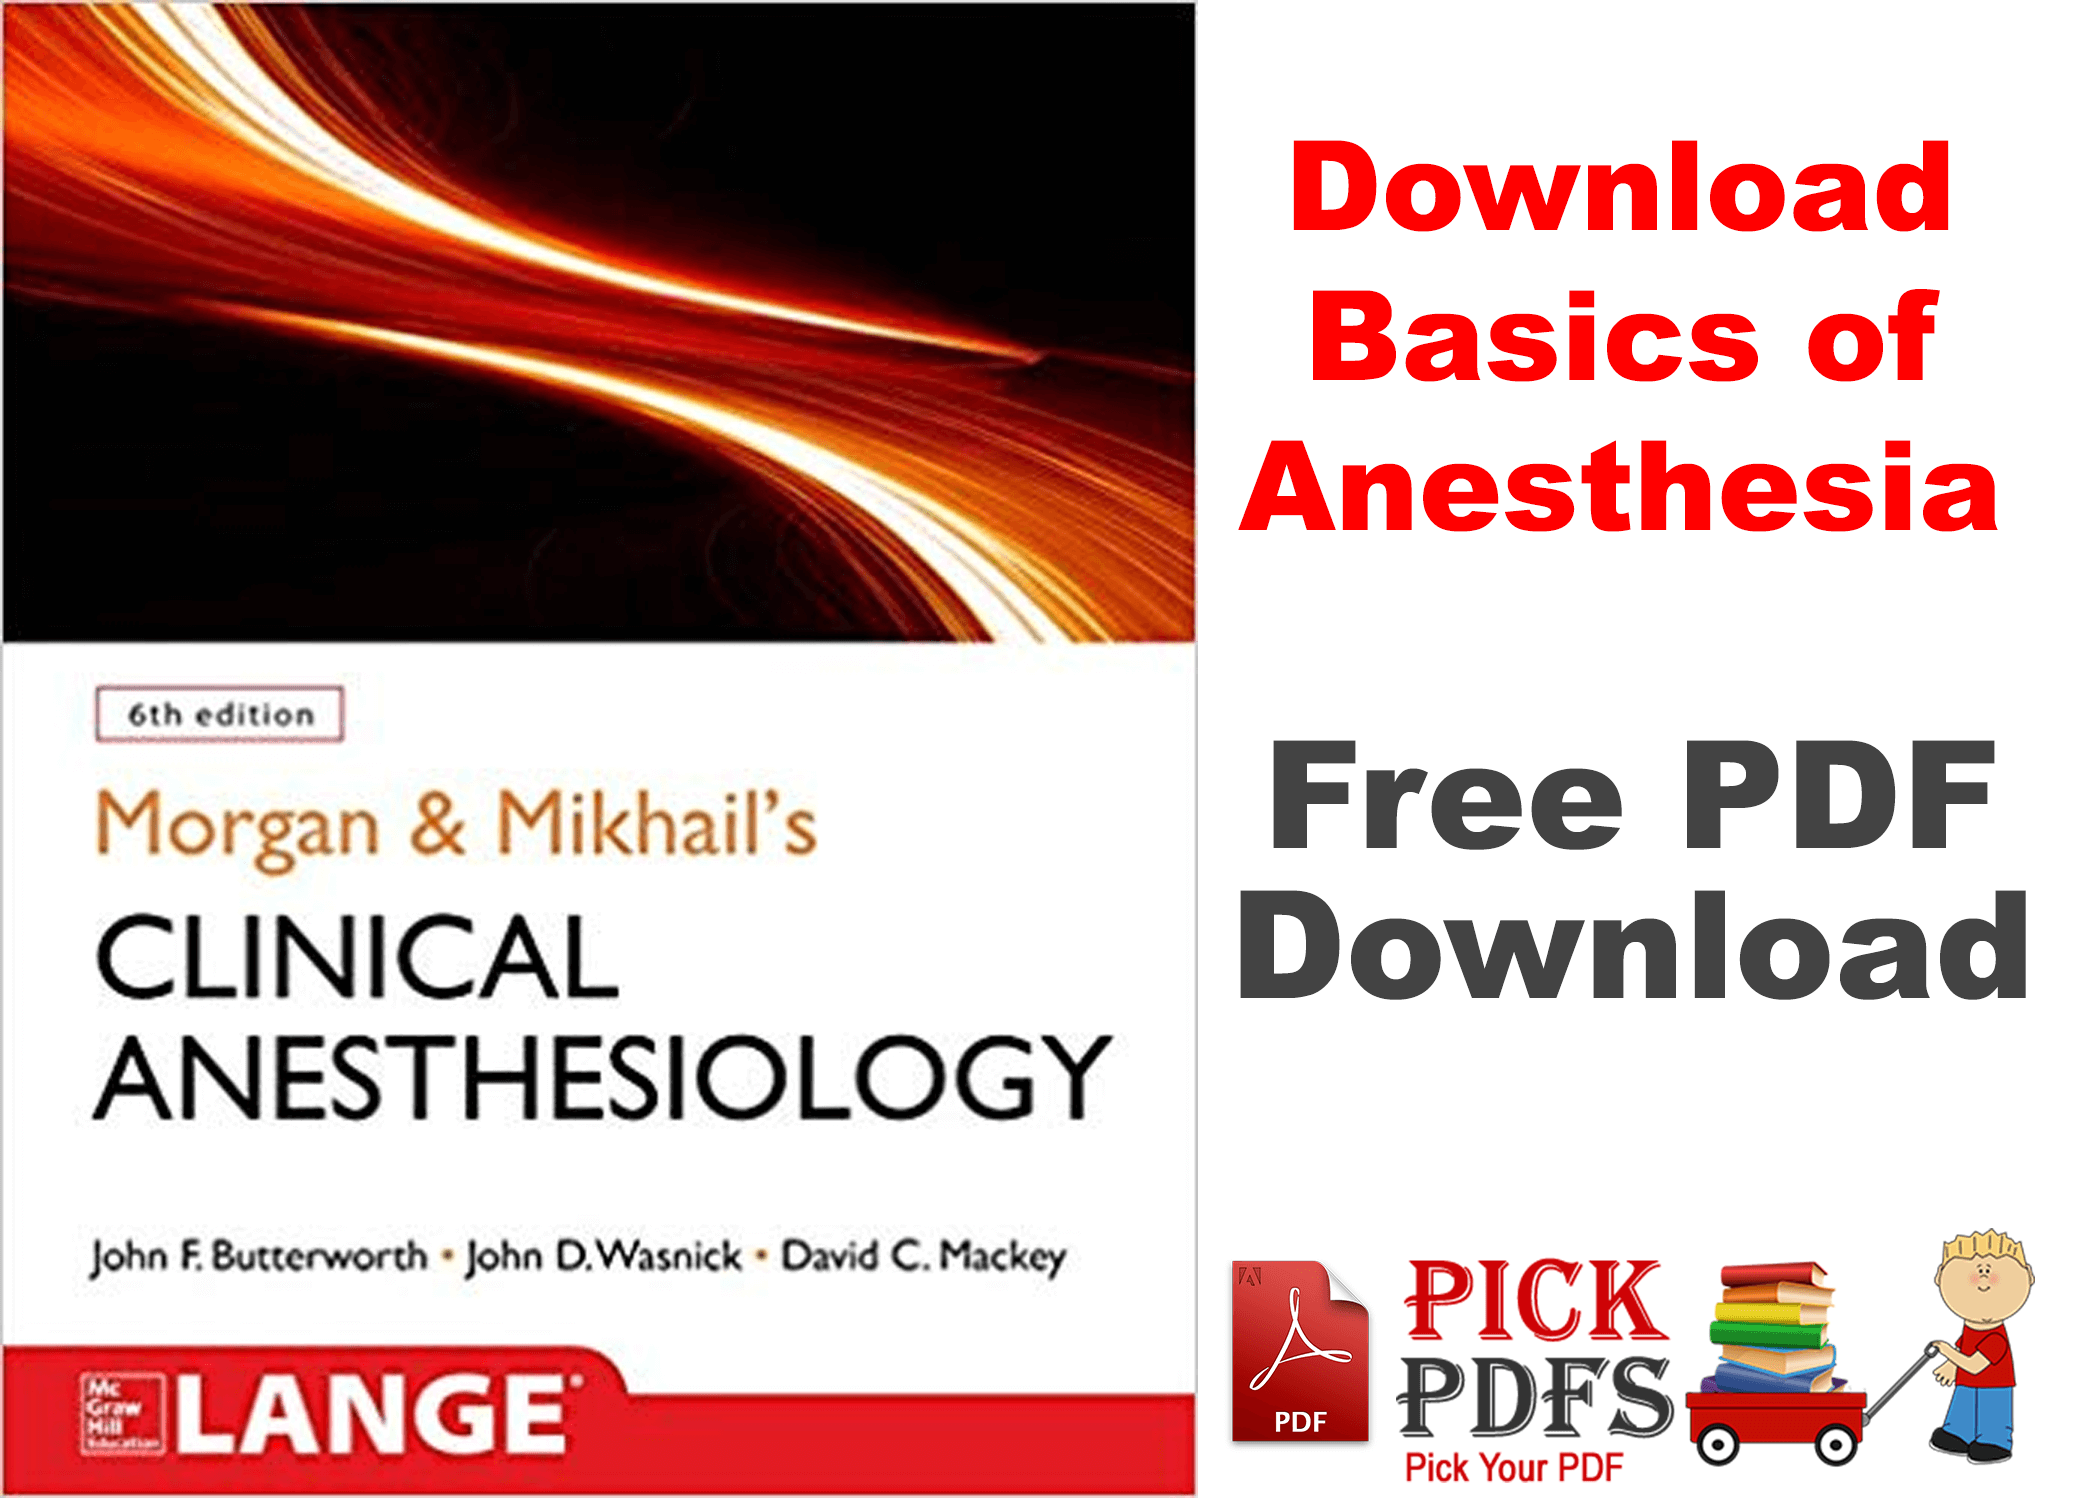 https://pickpdfs.com/anesthesiology/